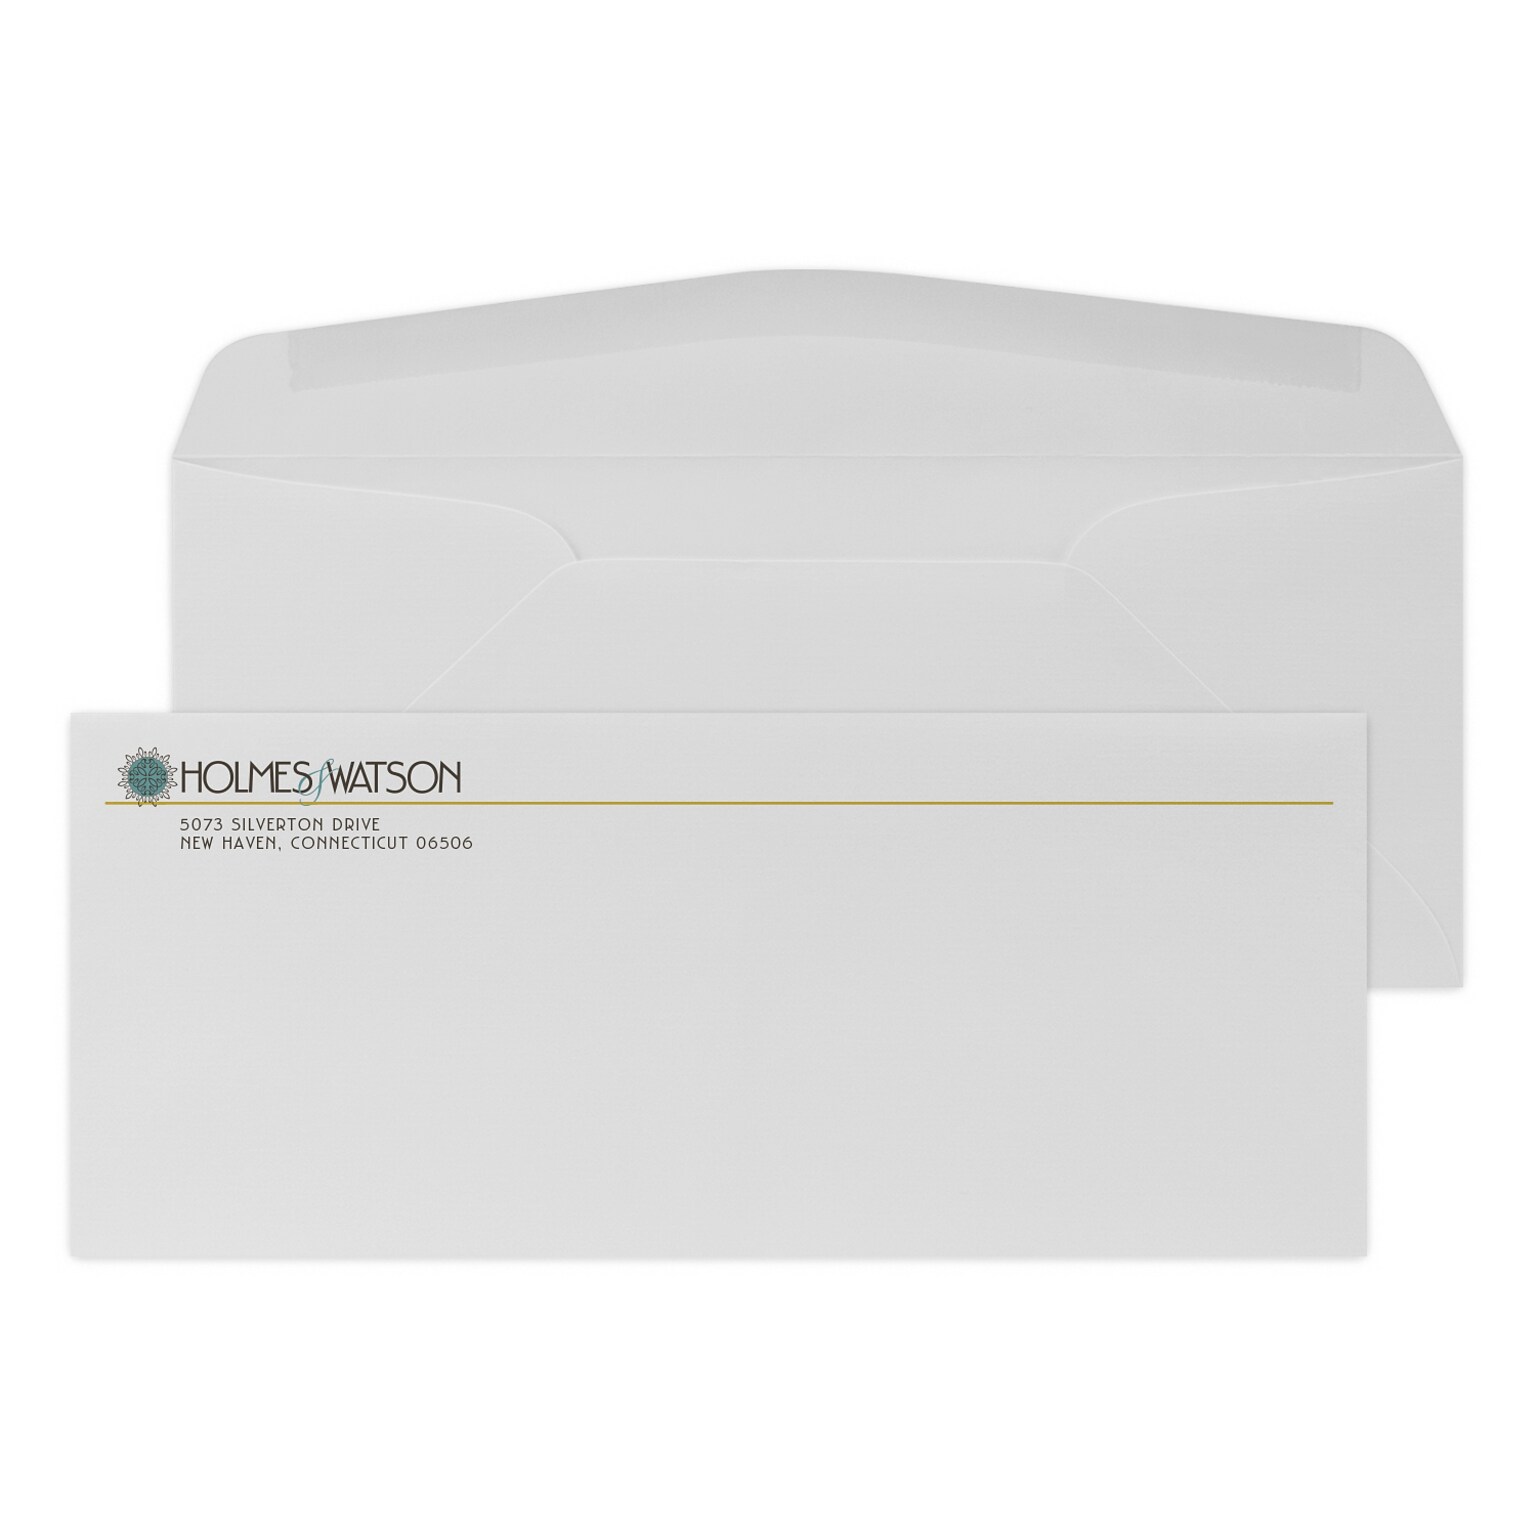 Custom Full Color #10 Stationery Envelopes, 4 1/4 x 9 1/2, 24# CLASSIC® LAID Antique Gray, Flat Ink, 250 / Pack